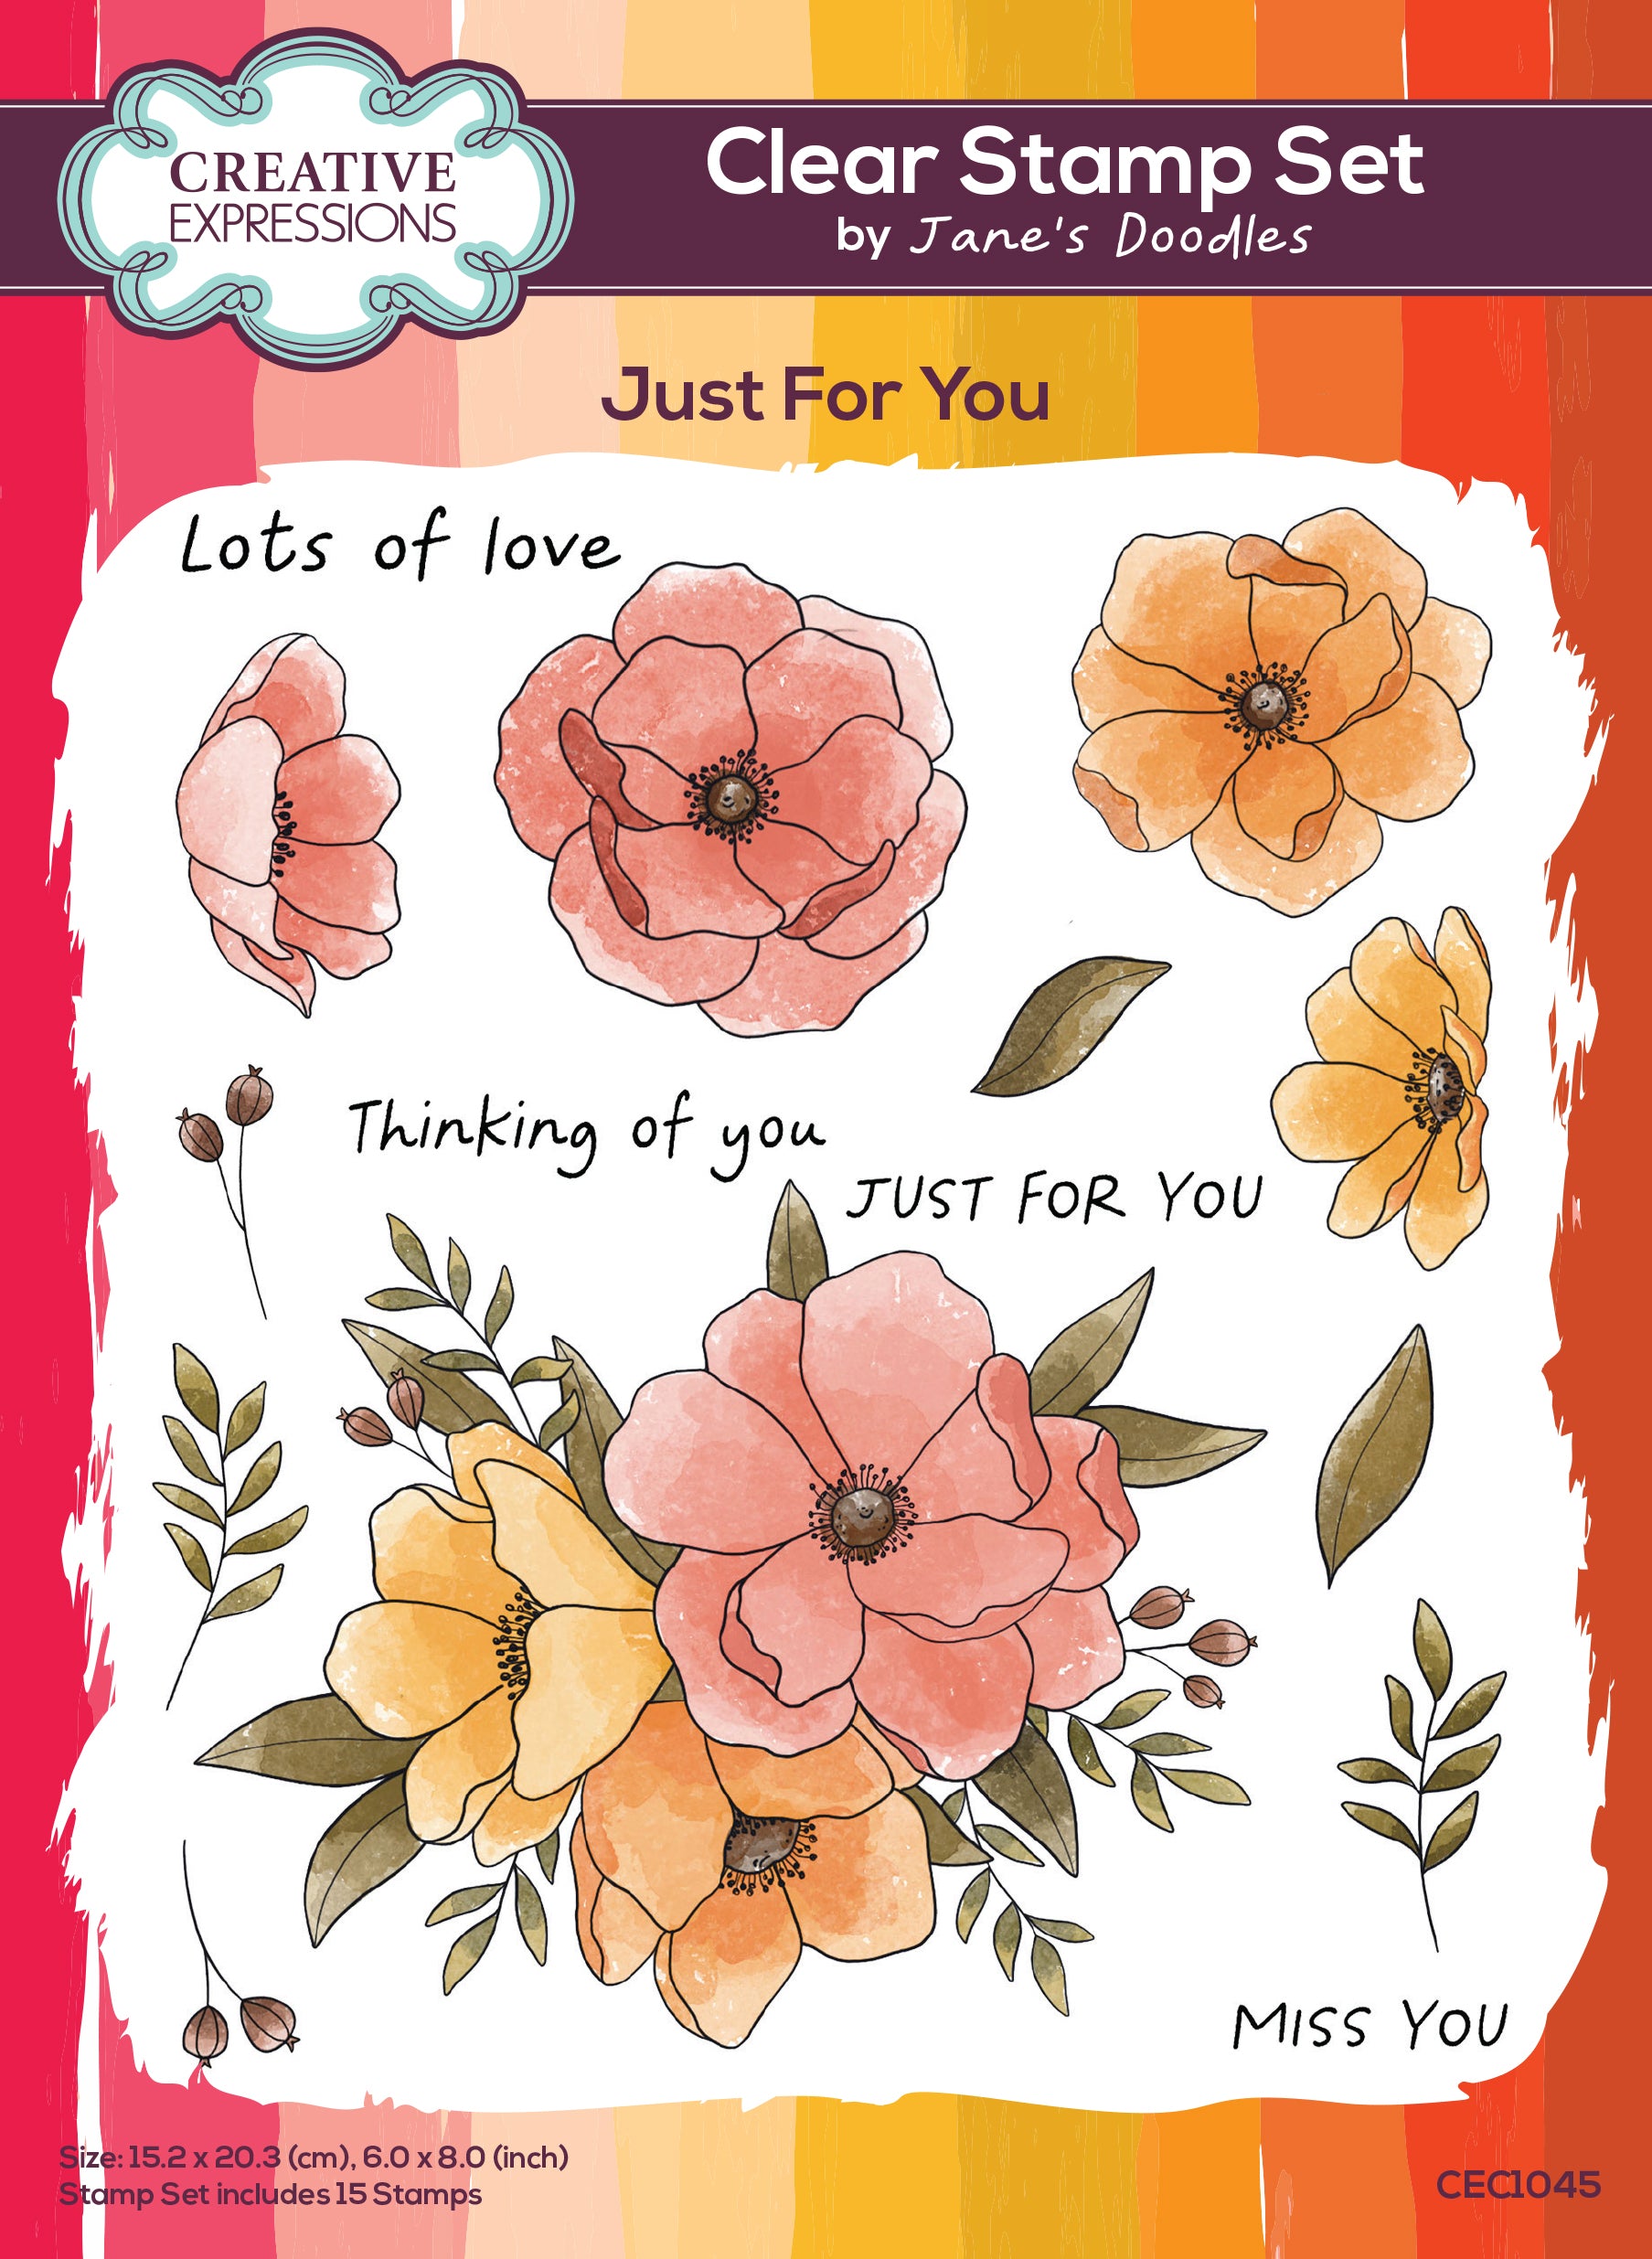 Creative Expressions Jane's Doodles Just For You 6 in x 8 in Clear Stamp Set